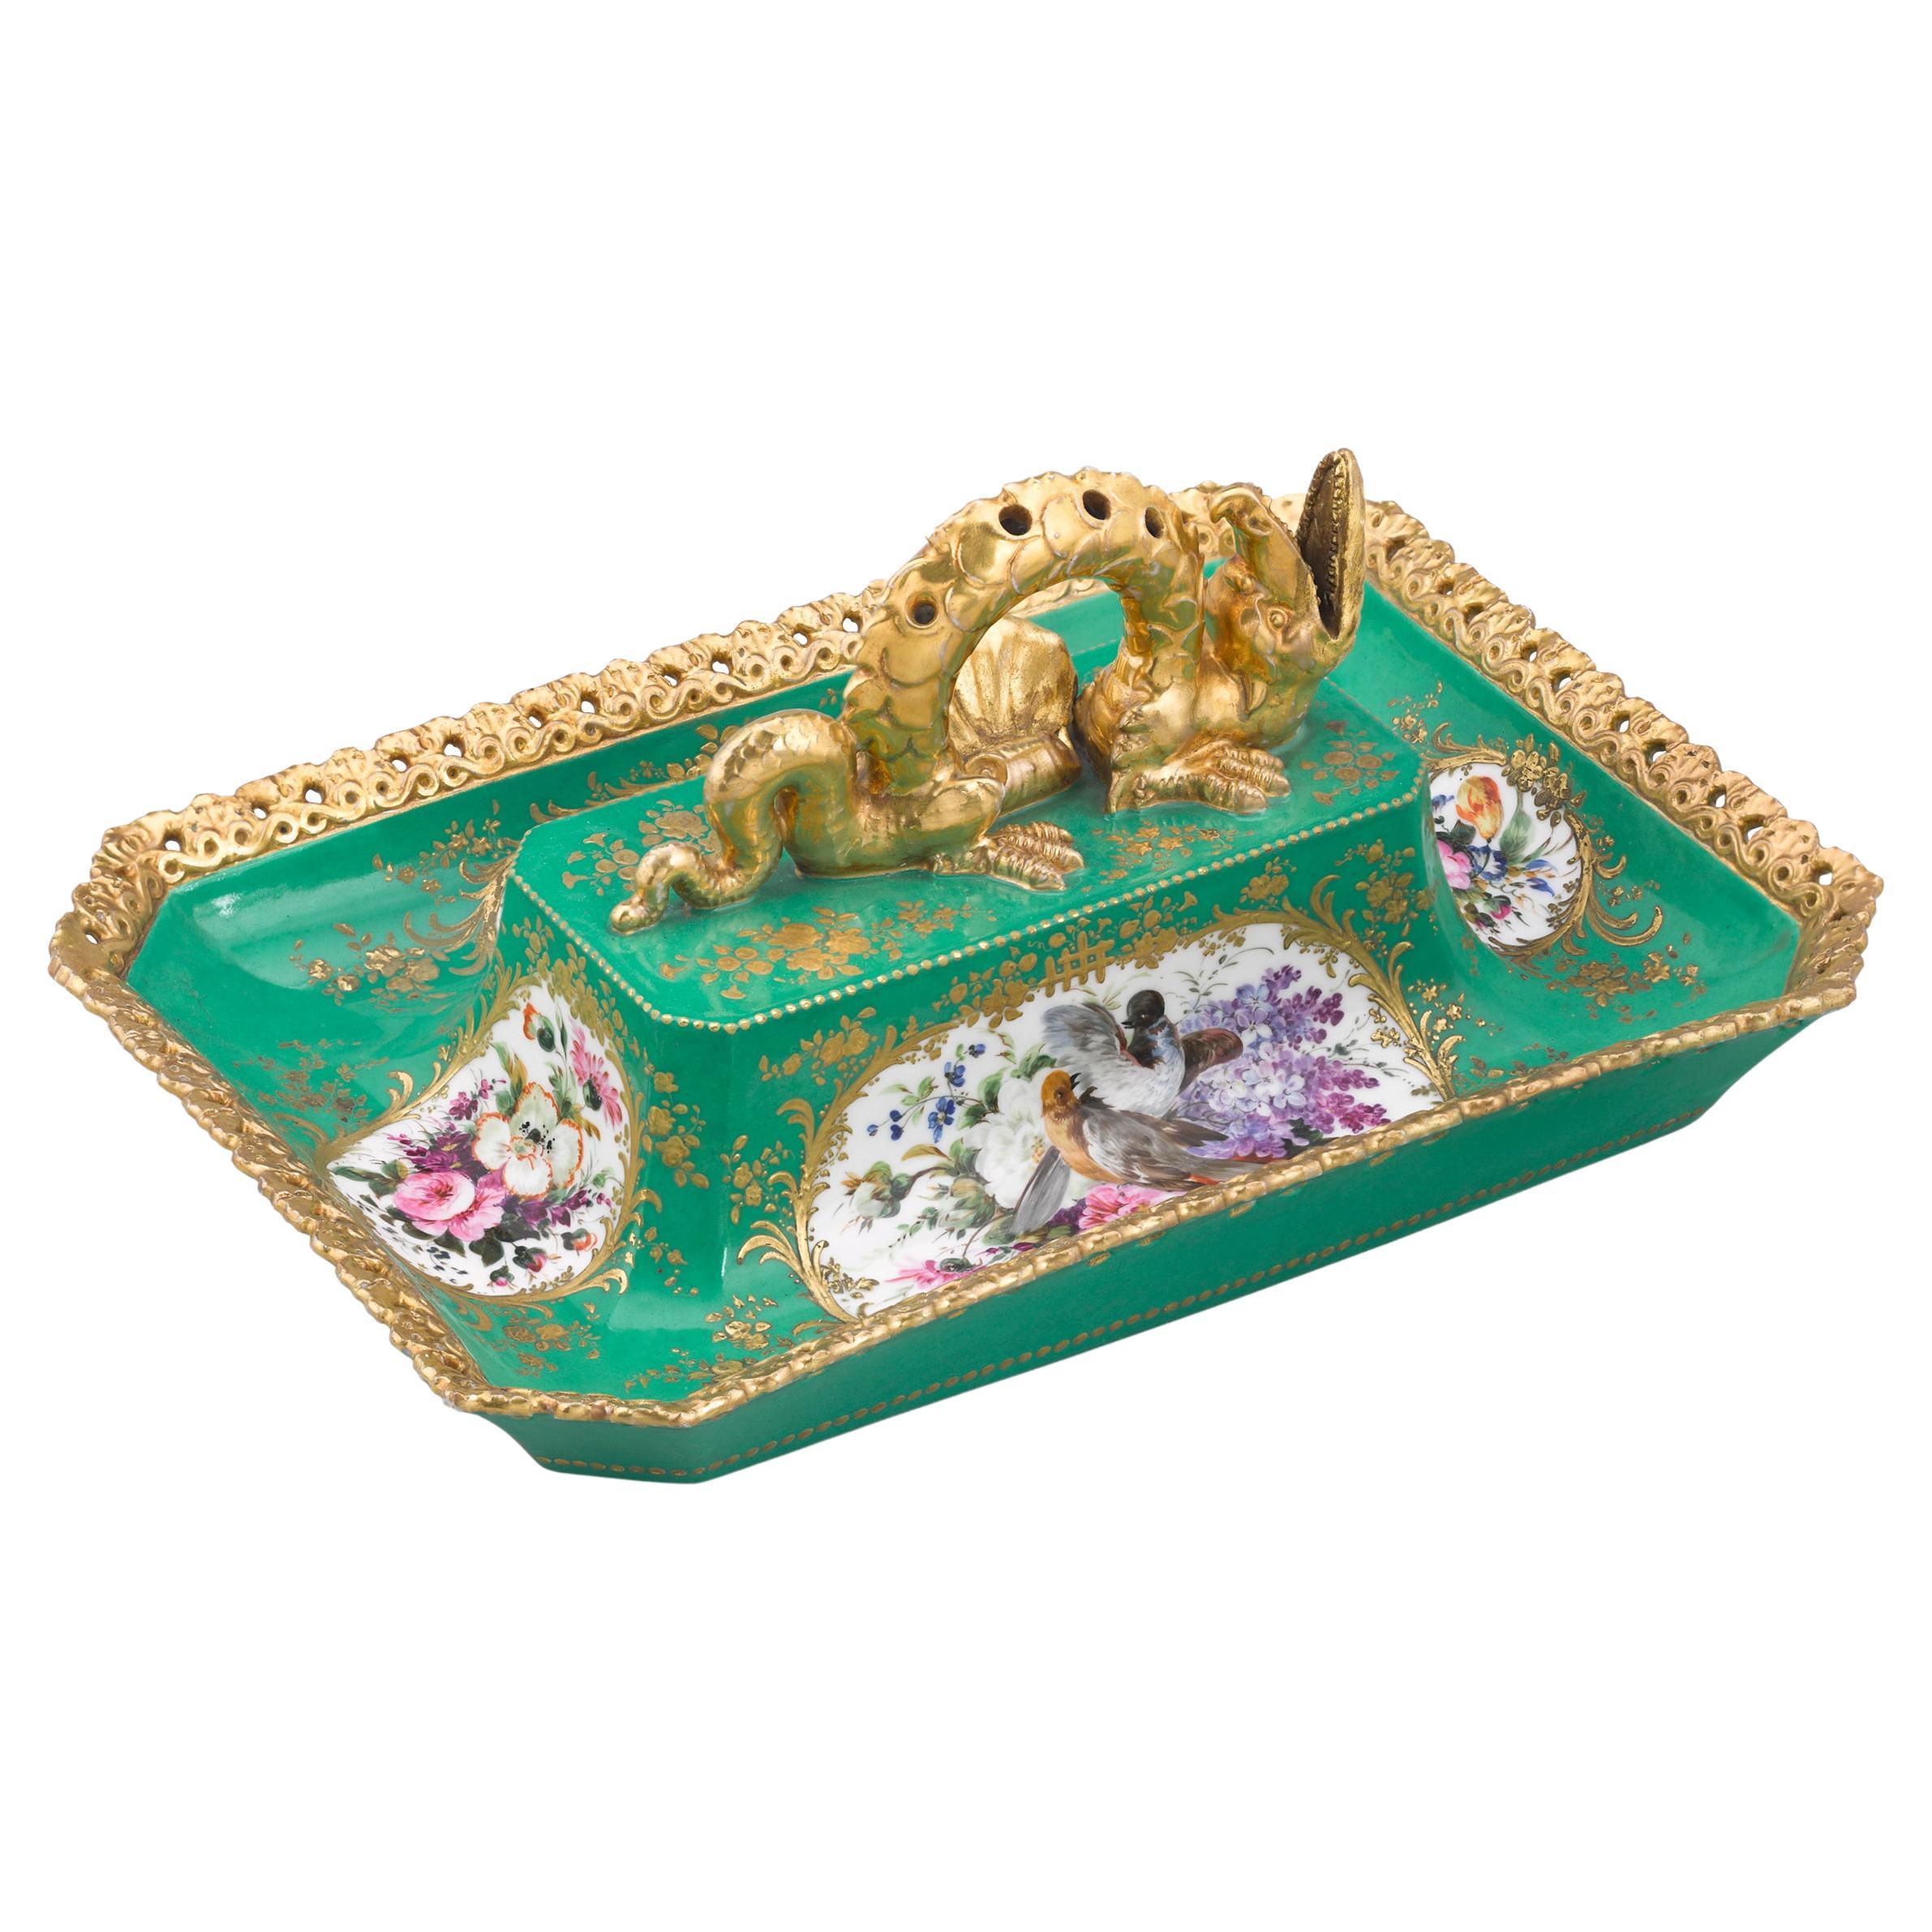 Jacob Petit Porcelain Chinoiserie Tray For Sale